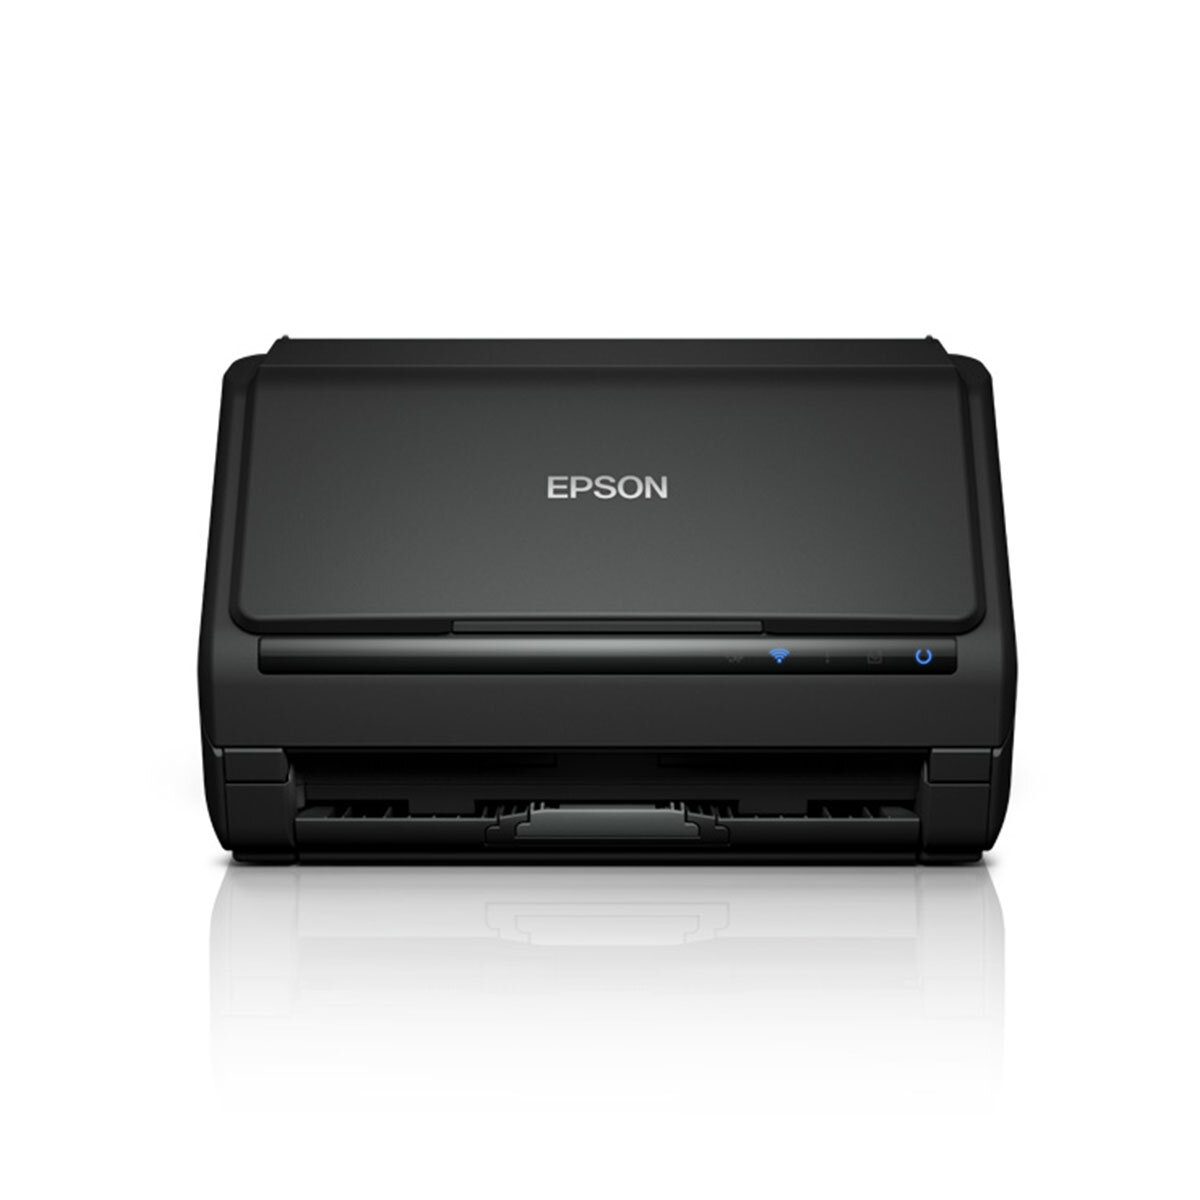 Buy Epson WorkForce ES-500W Scanner Feature3 Image at Costco.co.uk